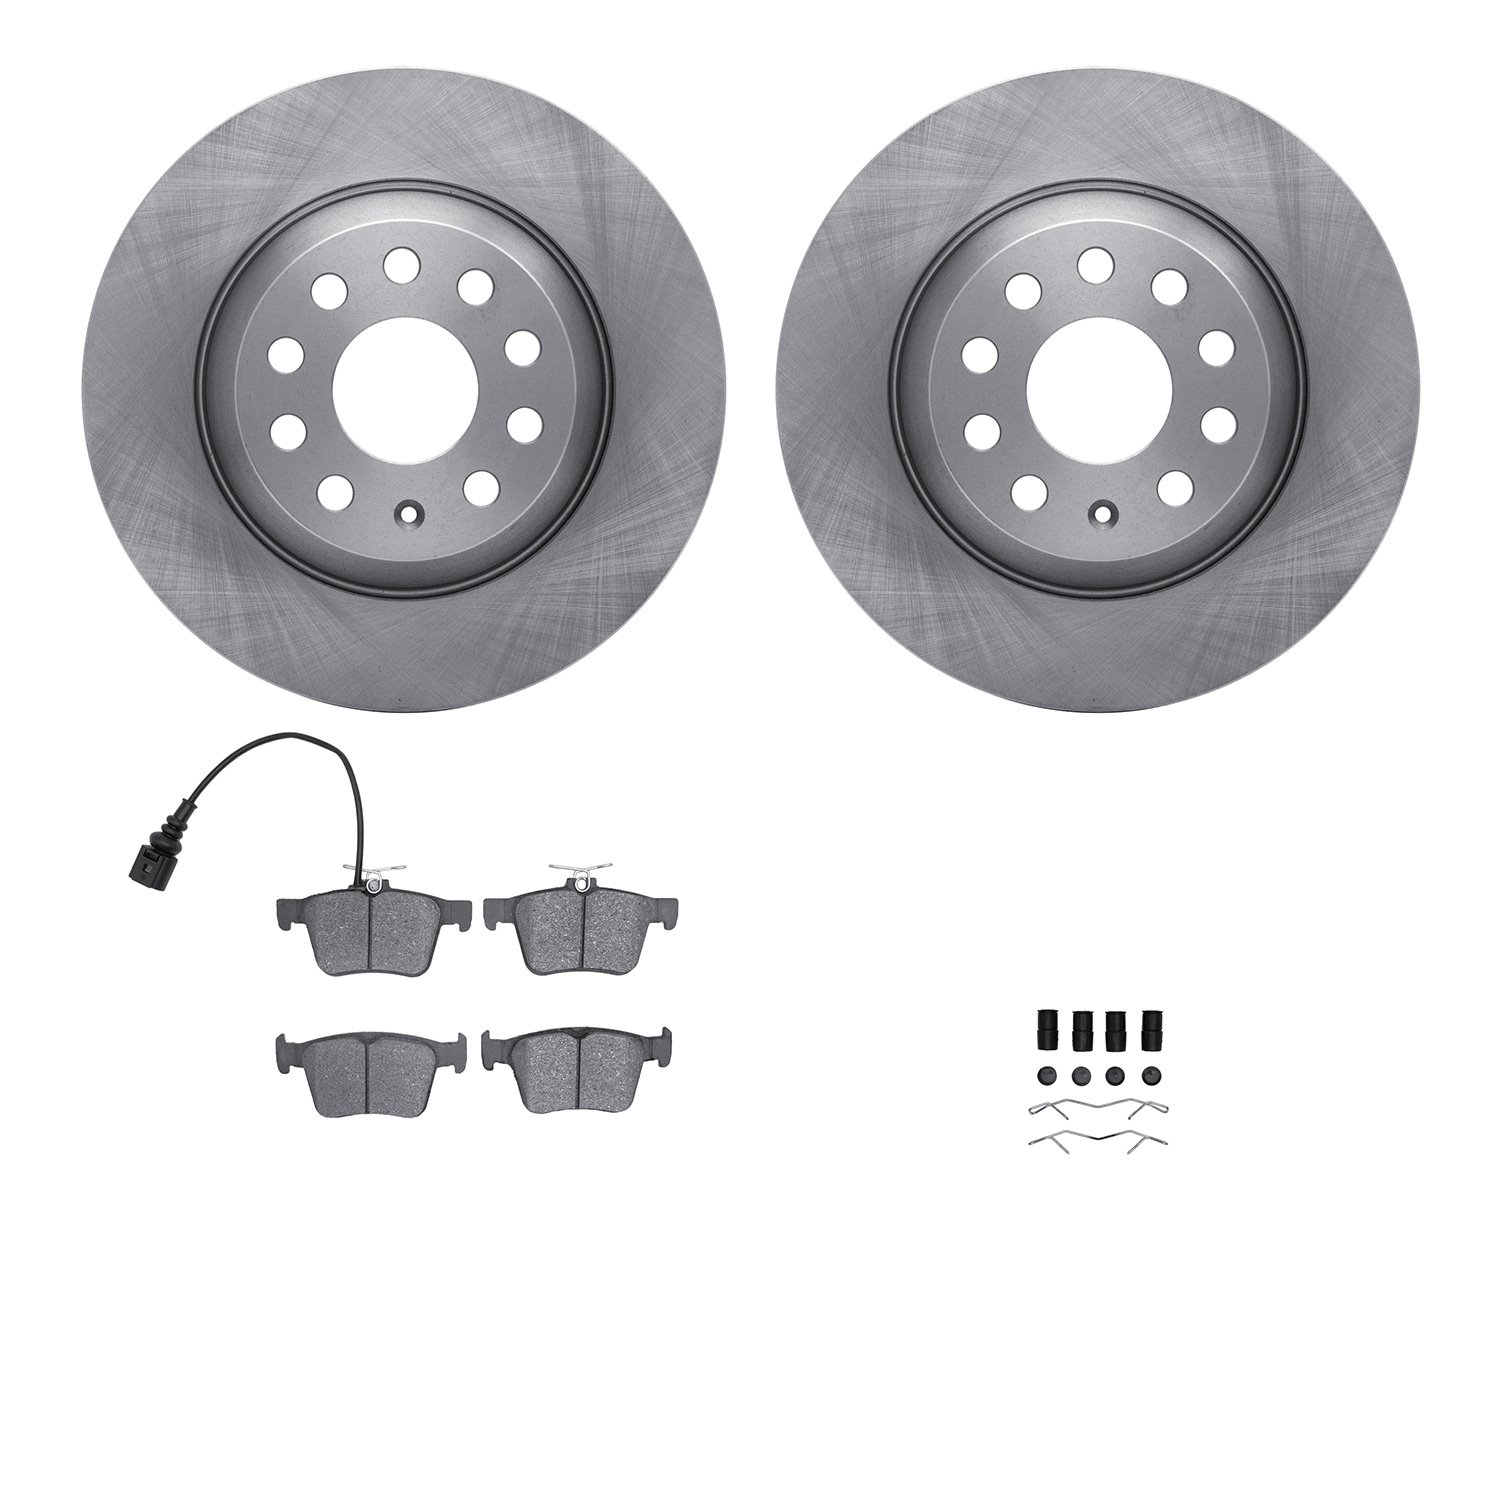 6312-73088 Brake Rotors with 3000-Series Ceramic Brake Pads Kit with Hardware, Fits Select Audi/Volkswagen, Position: Rear